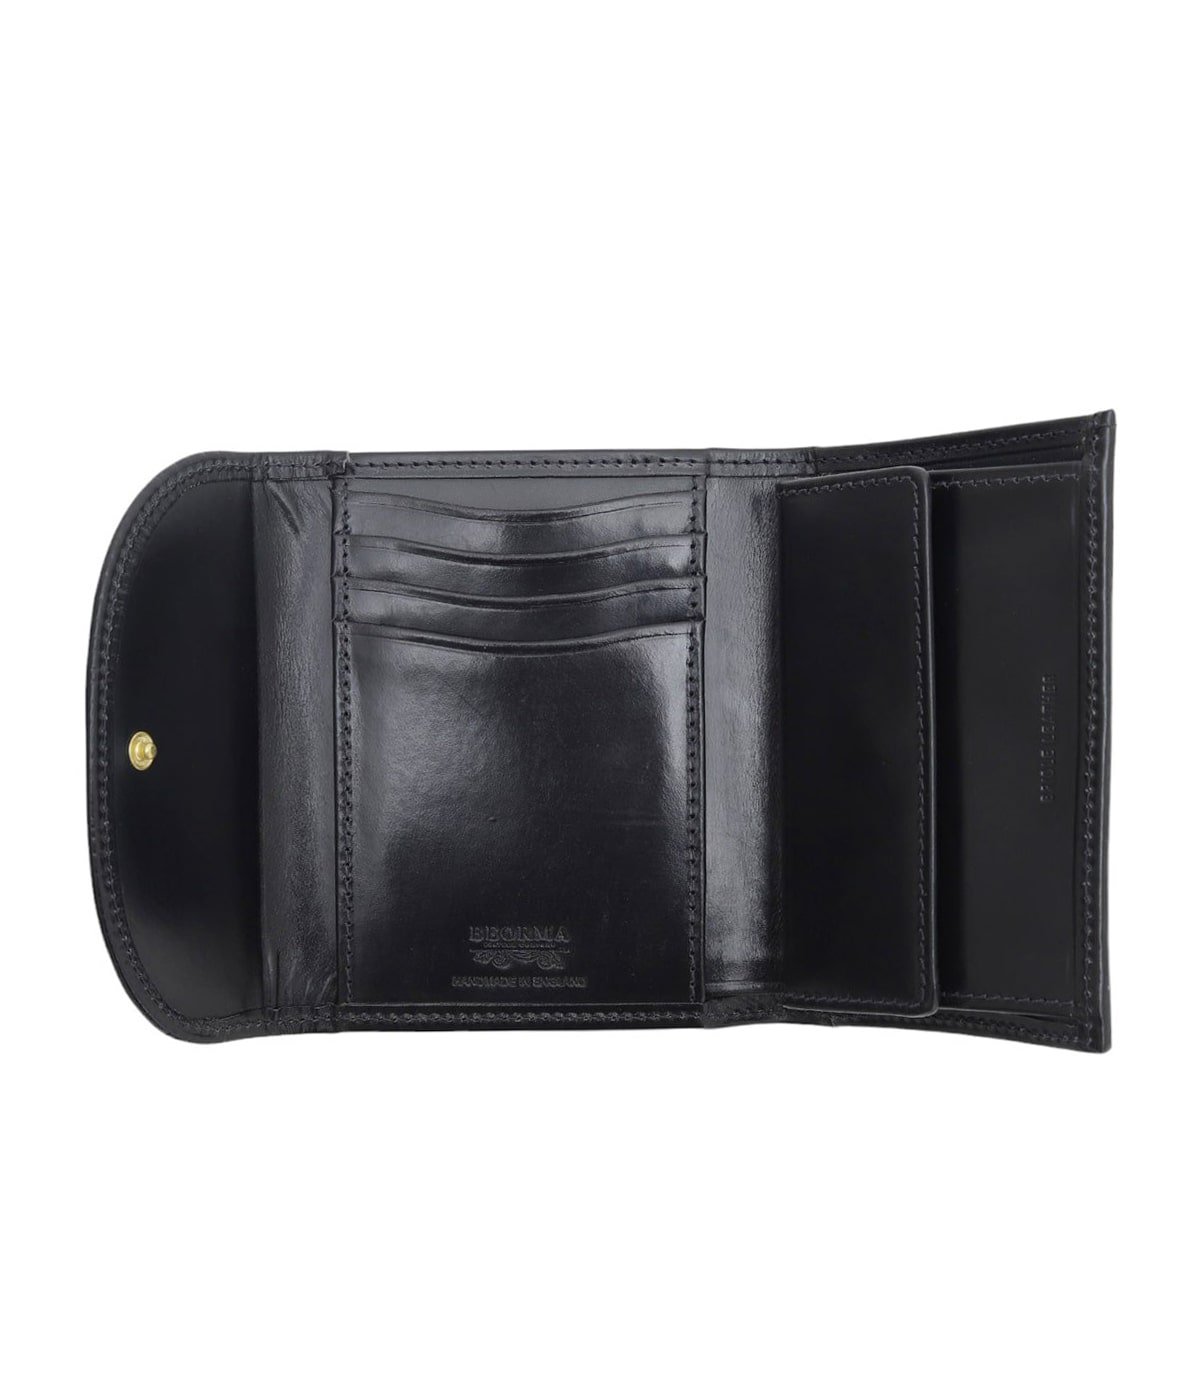 BRIDLE LEATHER TURNED EDGE 3FOLD WALLET | BEORMA LEATHER COMPANY 